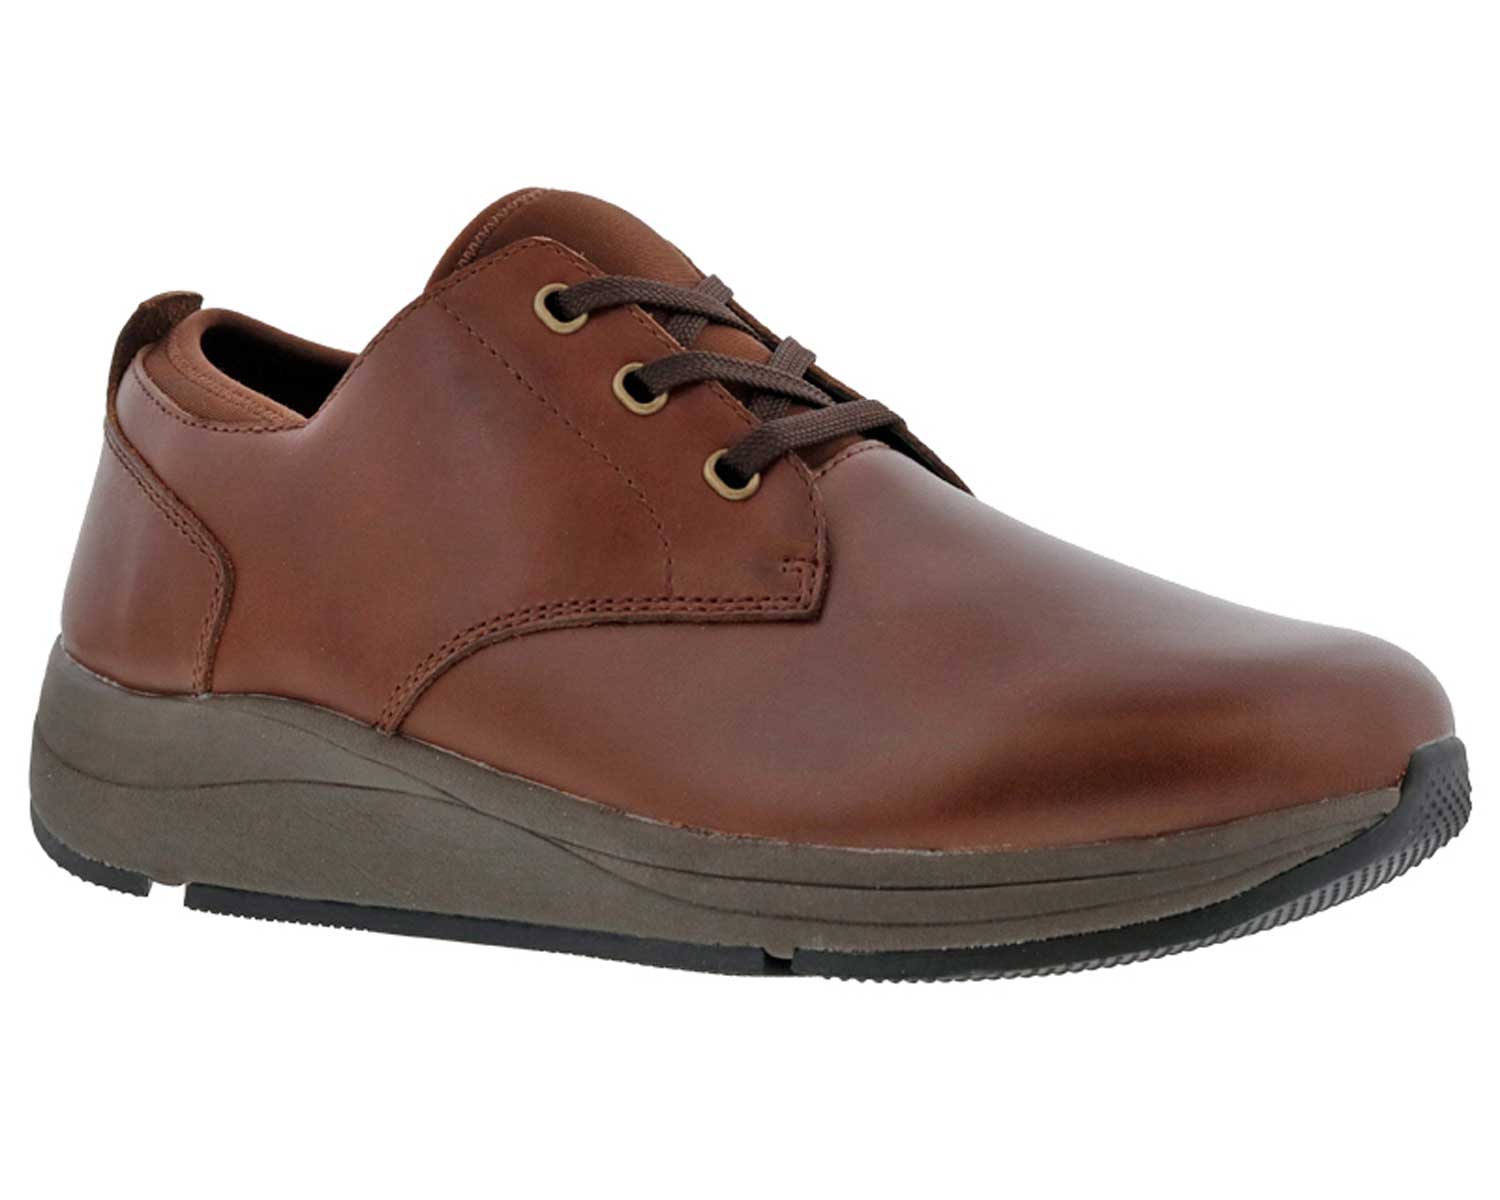 Drew Shoes Armstrong 40220 Men's Casual Shoe | Orthopedic - Extra Wide